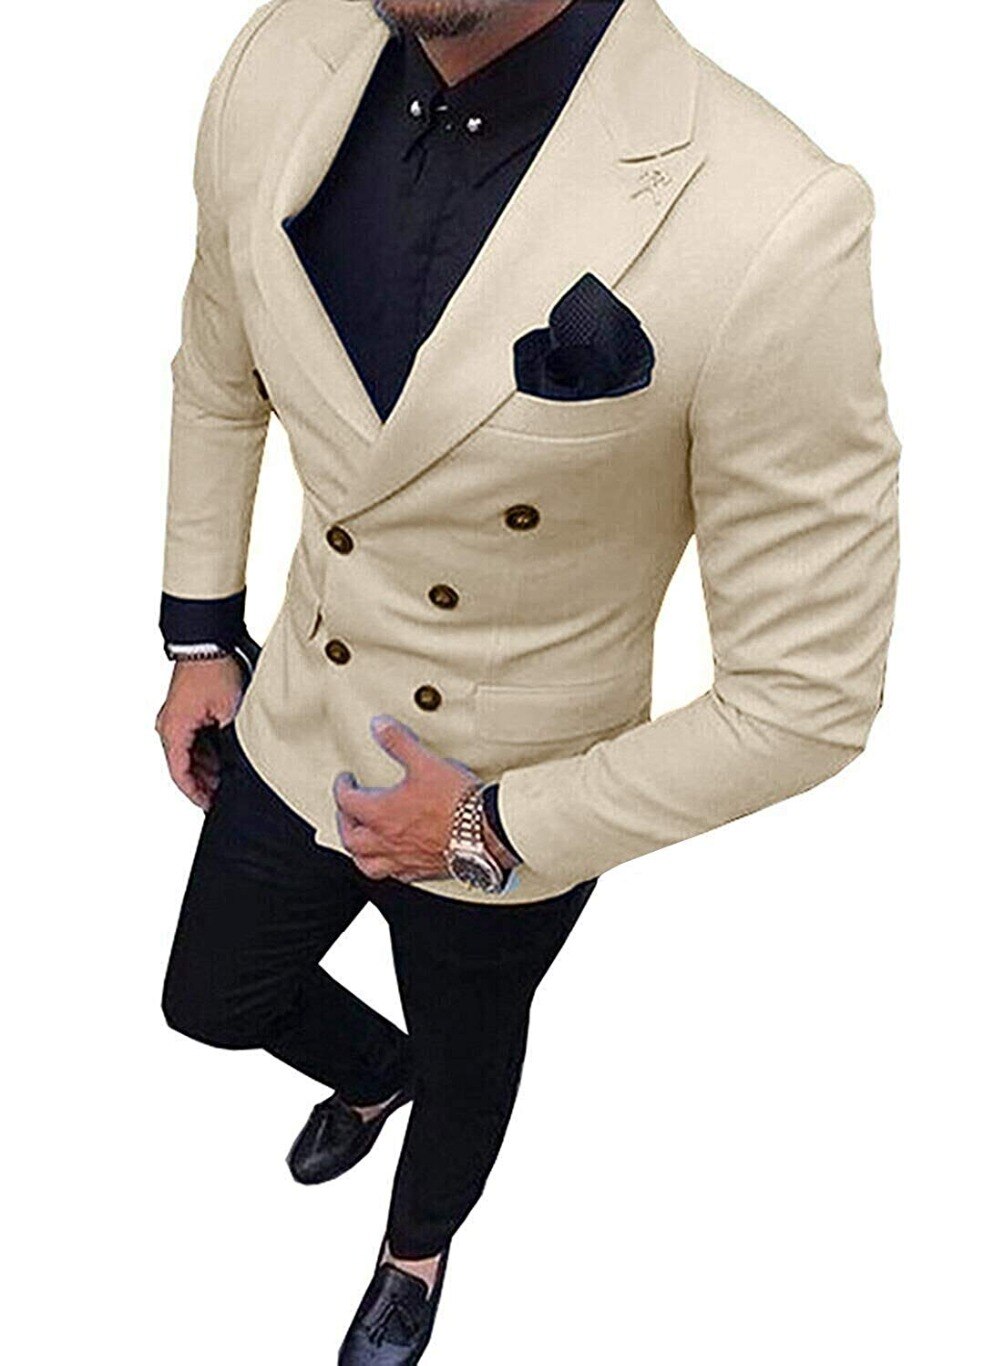 Men Suits Slim Fit 2 Pieces Double-breasted Business Groom Jacket Tuxedos Blazer Suits (Blazer+Pants)